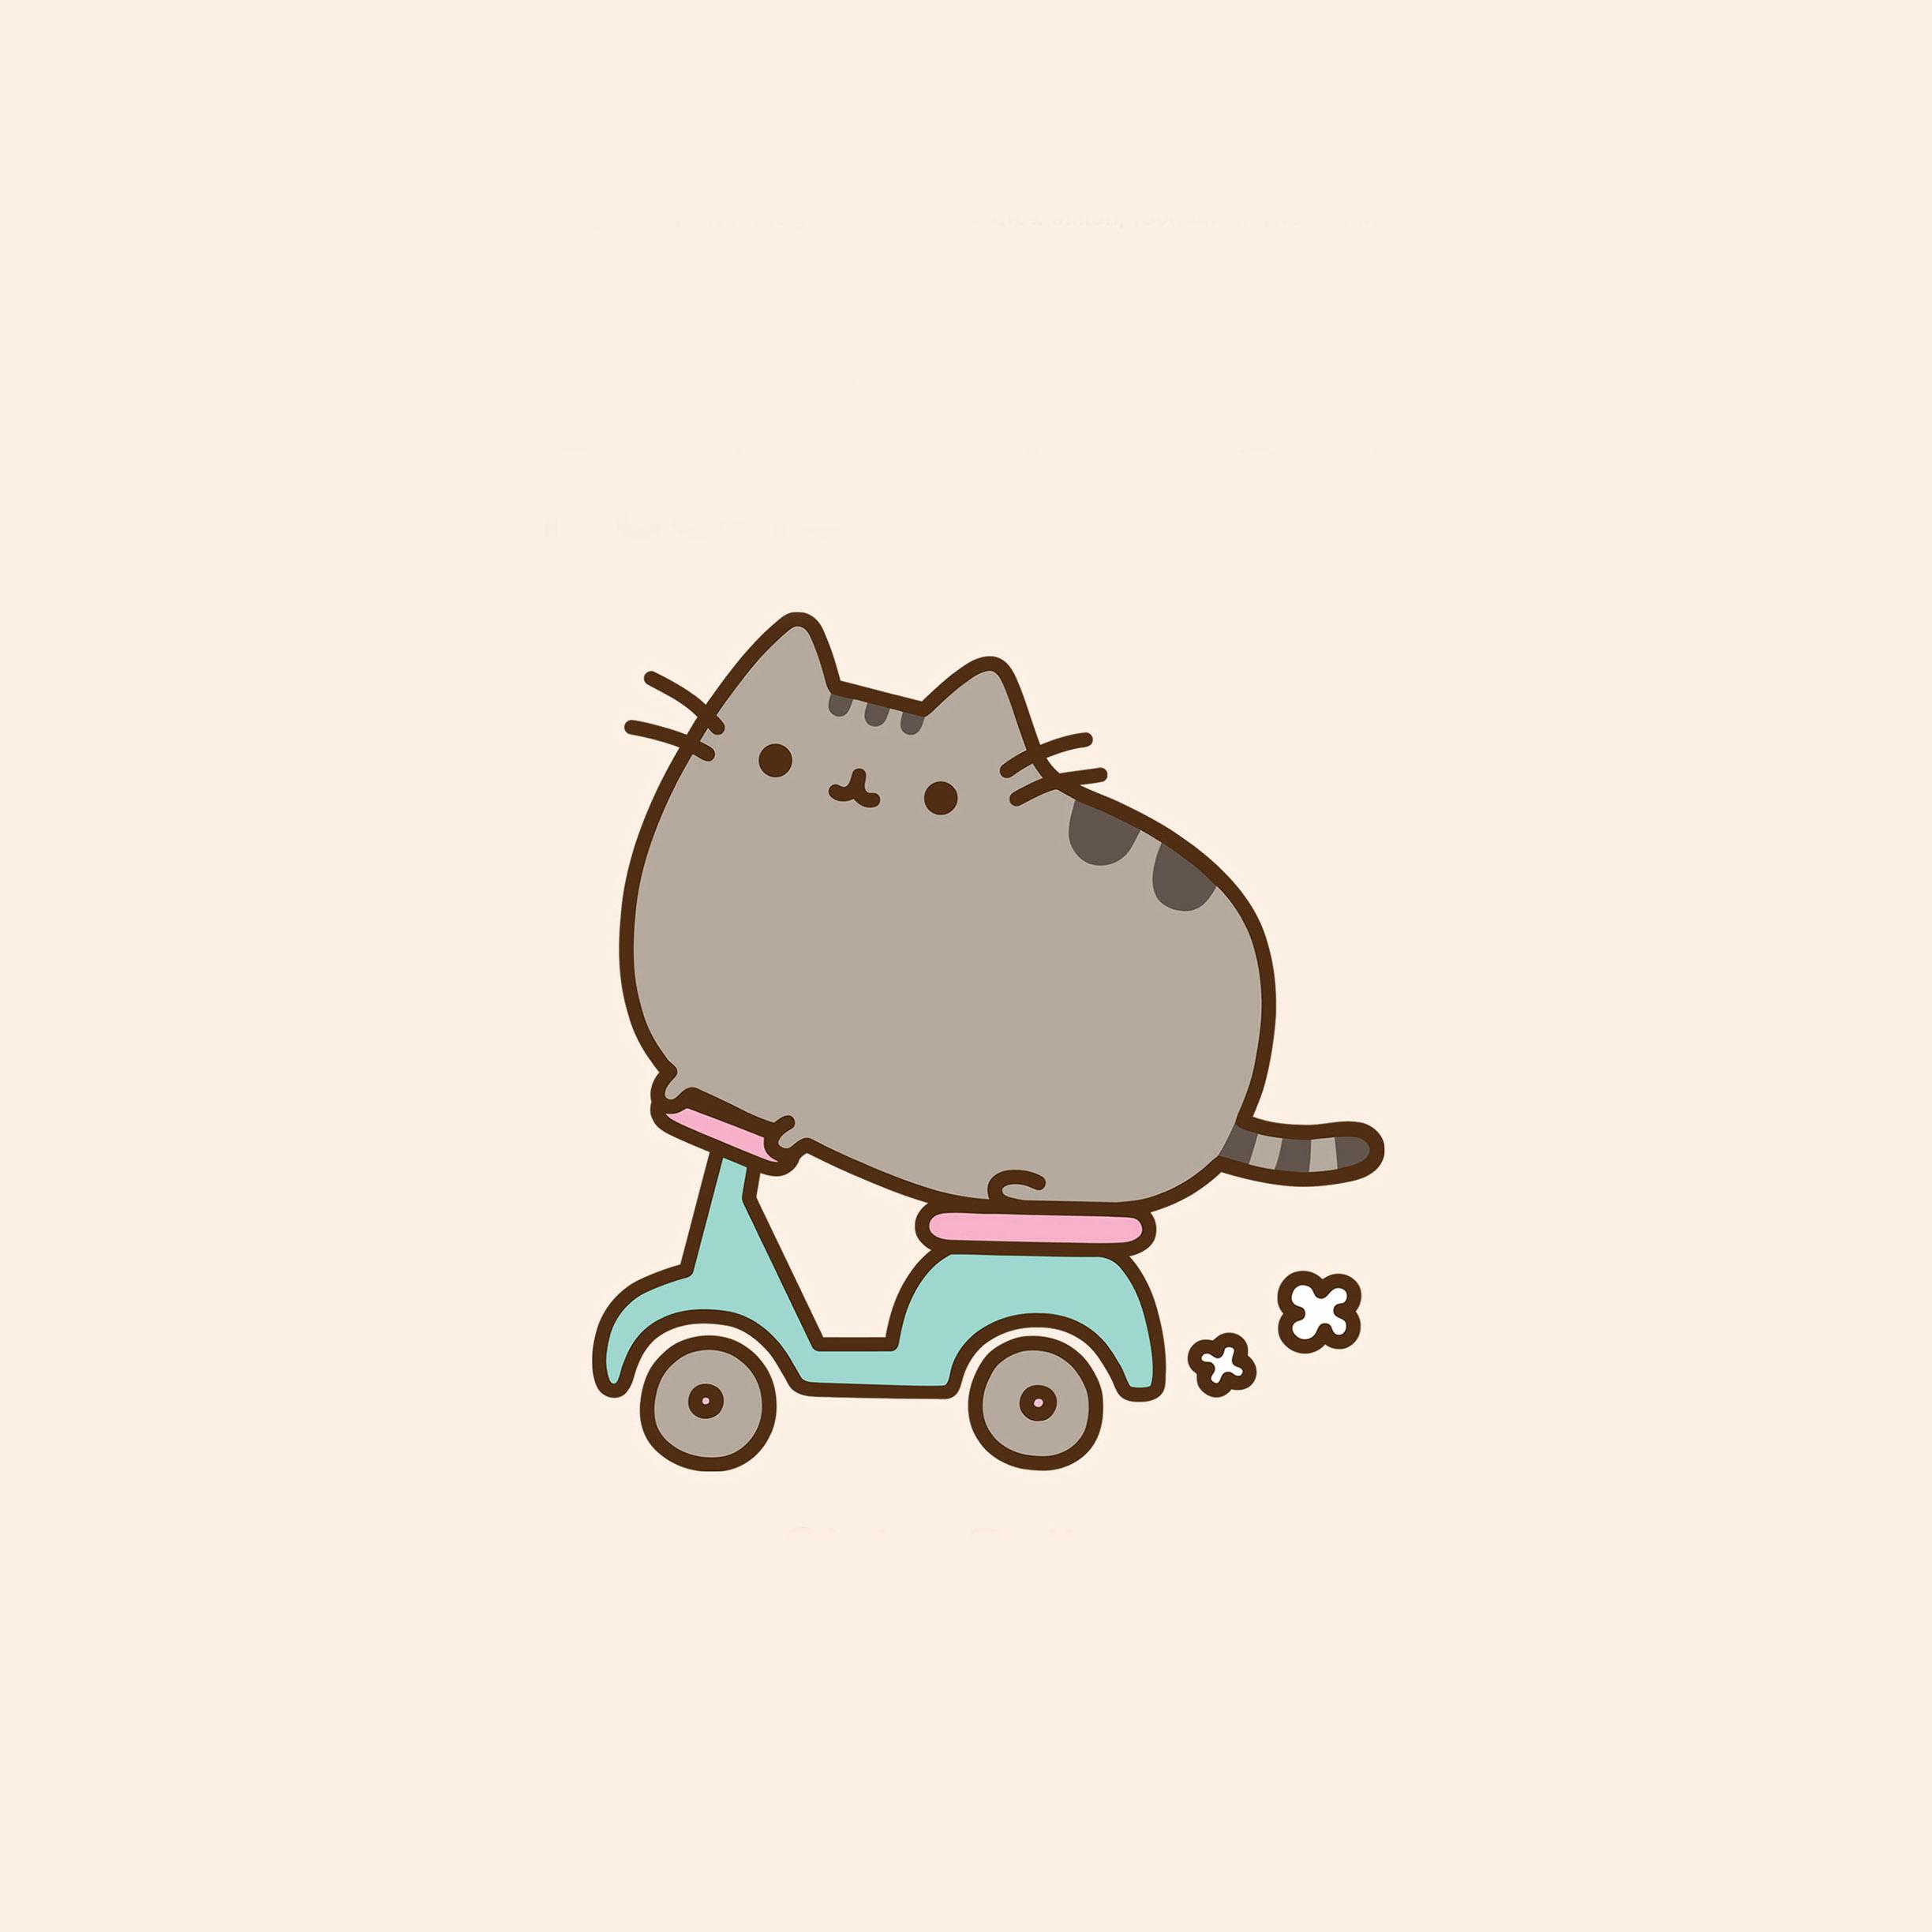 Pusheen The Cat Wallpaper. Awesome Cat Wallpaper, Amazing Cat Wallpaper and Funny Cat Wallpaper